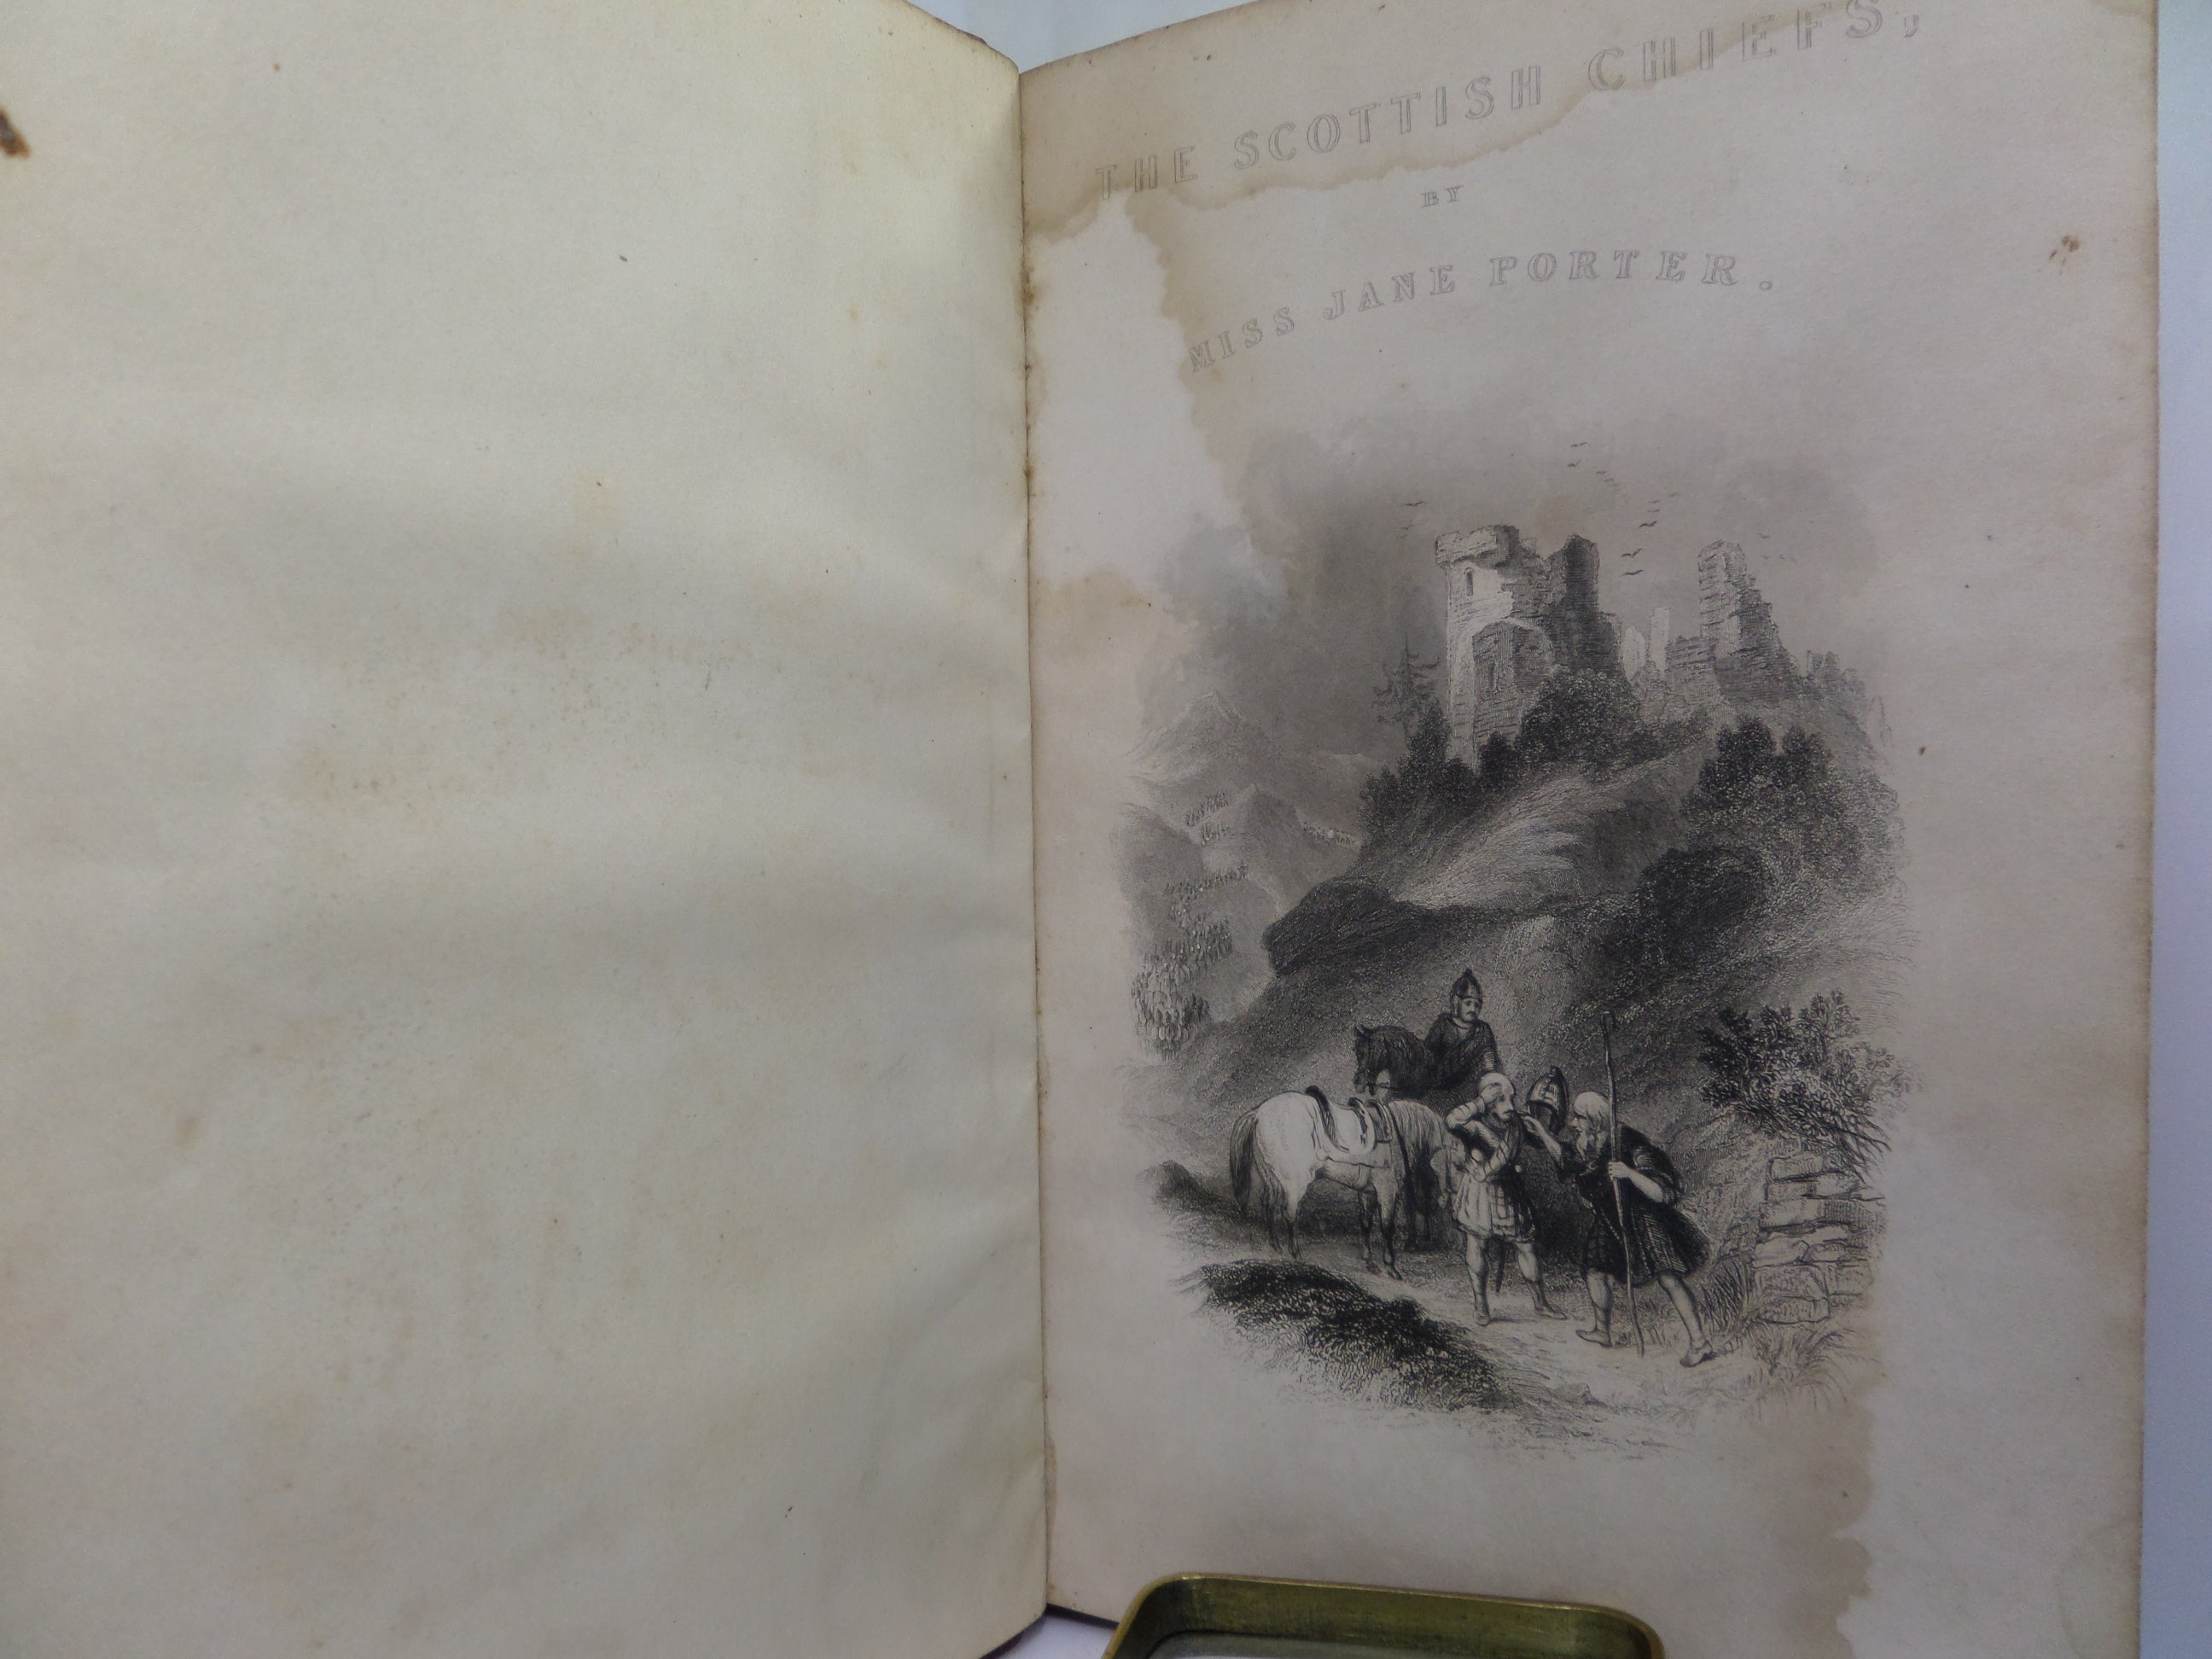 THE SCOTTISH CHIEFS BY MISS JANE PORTER 1840 ILLUSTRATED EDITION LEATHER-BOUND